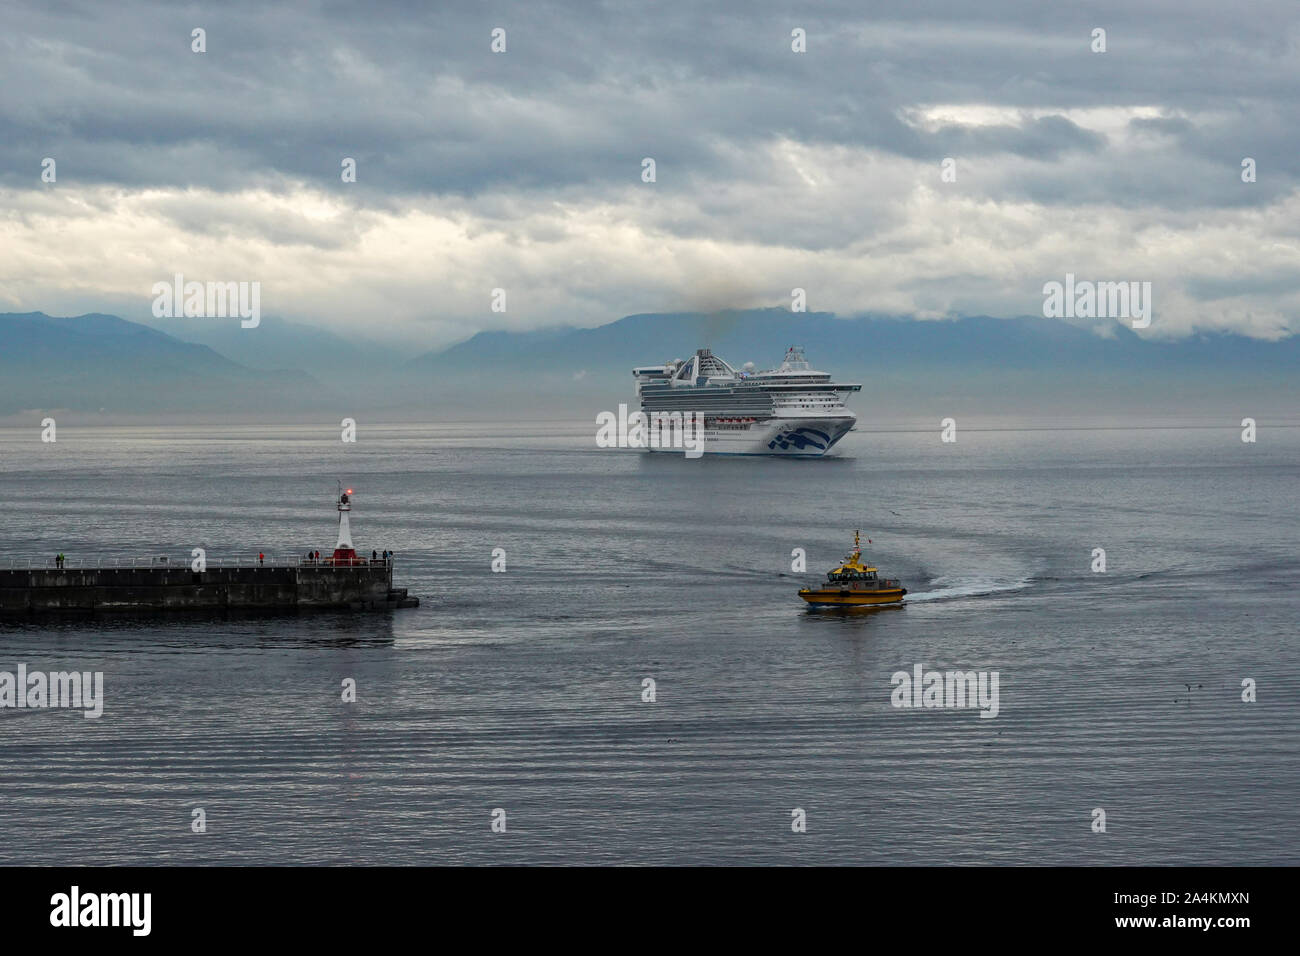 Victoria/Canada-9/14/19: A pilot boat escorts a cruise ship into or out of port from the ocean channel. Stock Photo